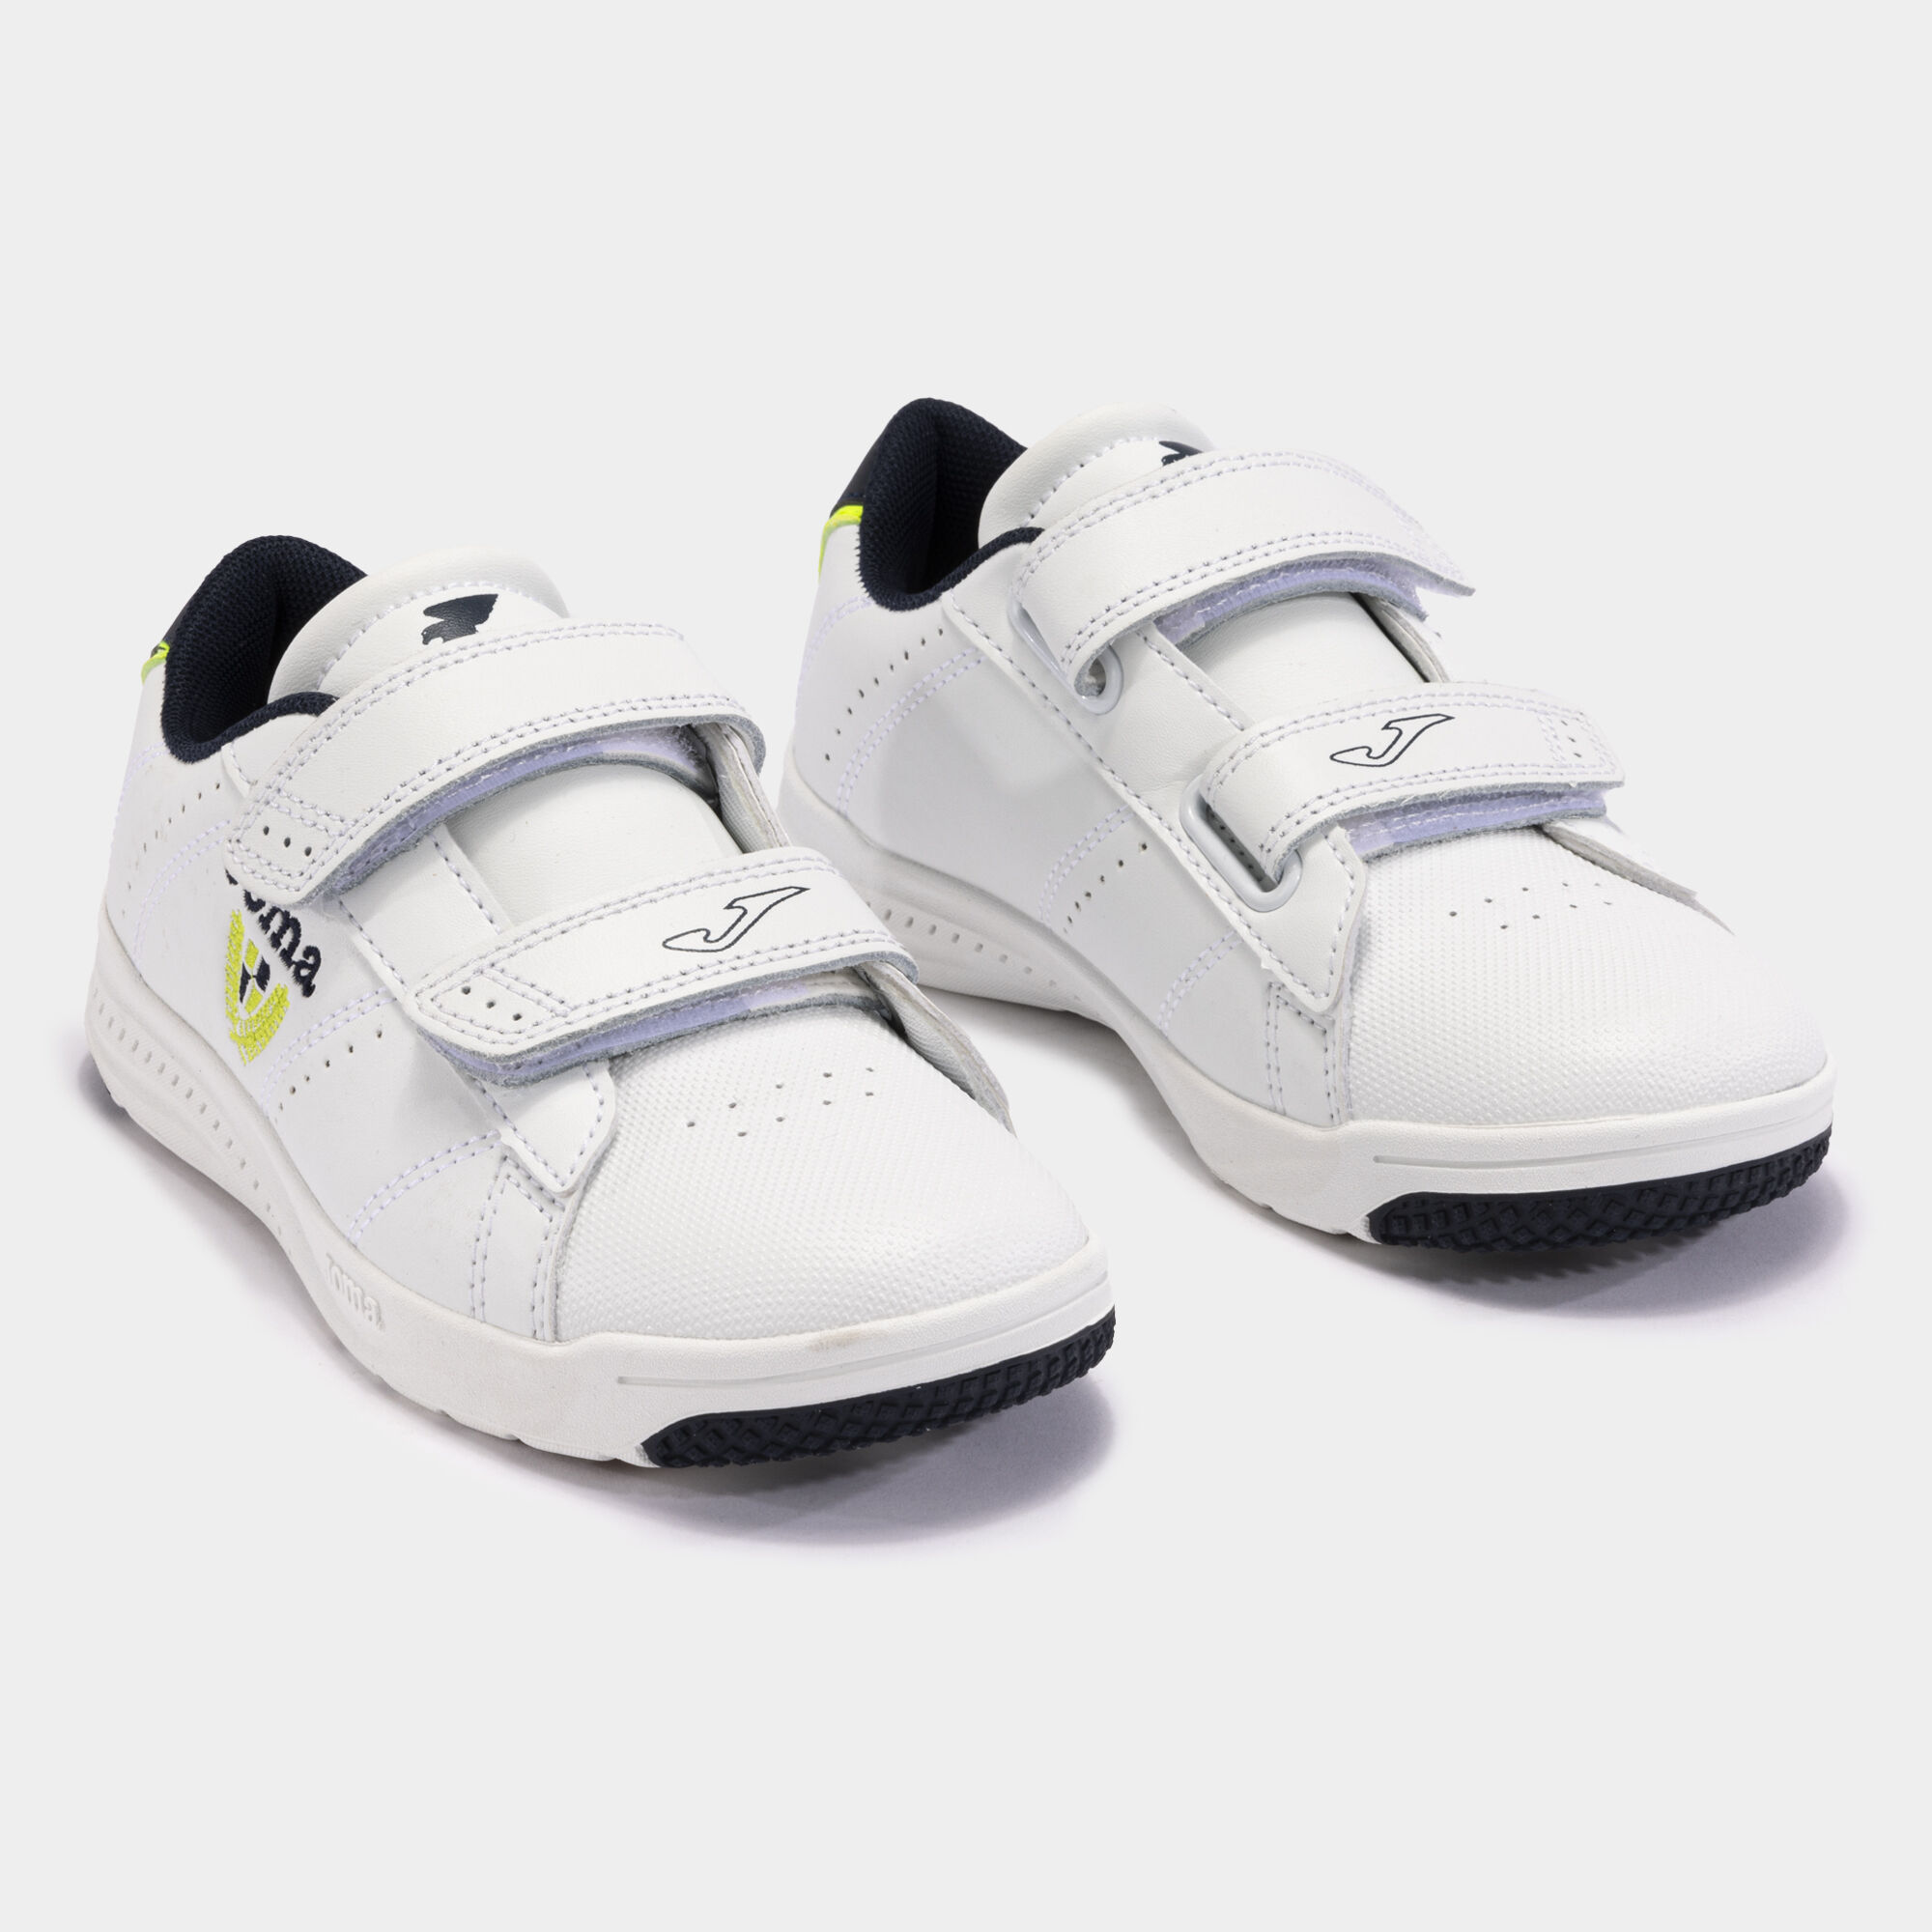 Casual shoes W.Play Jr 24 junior white lime